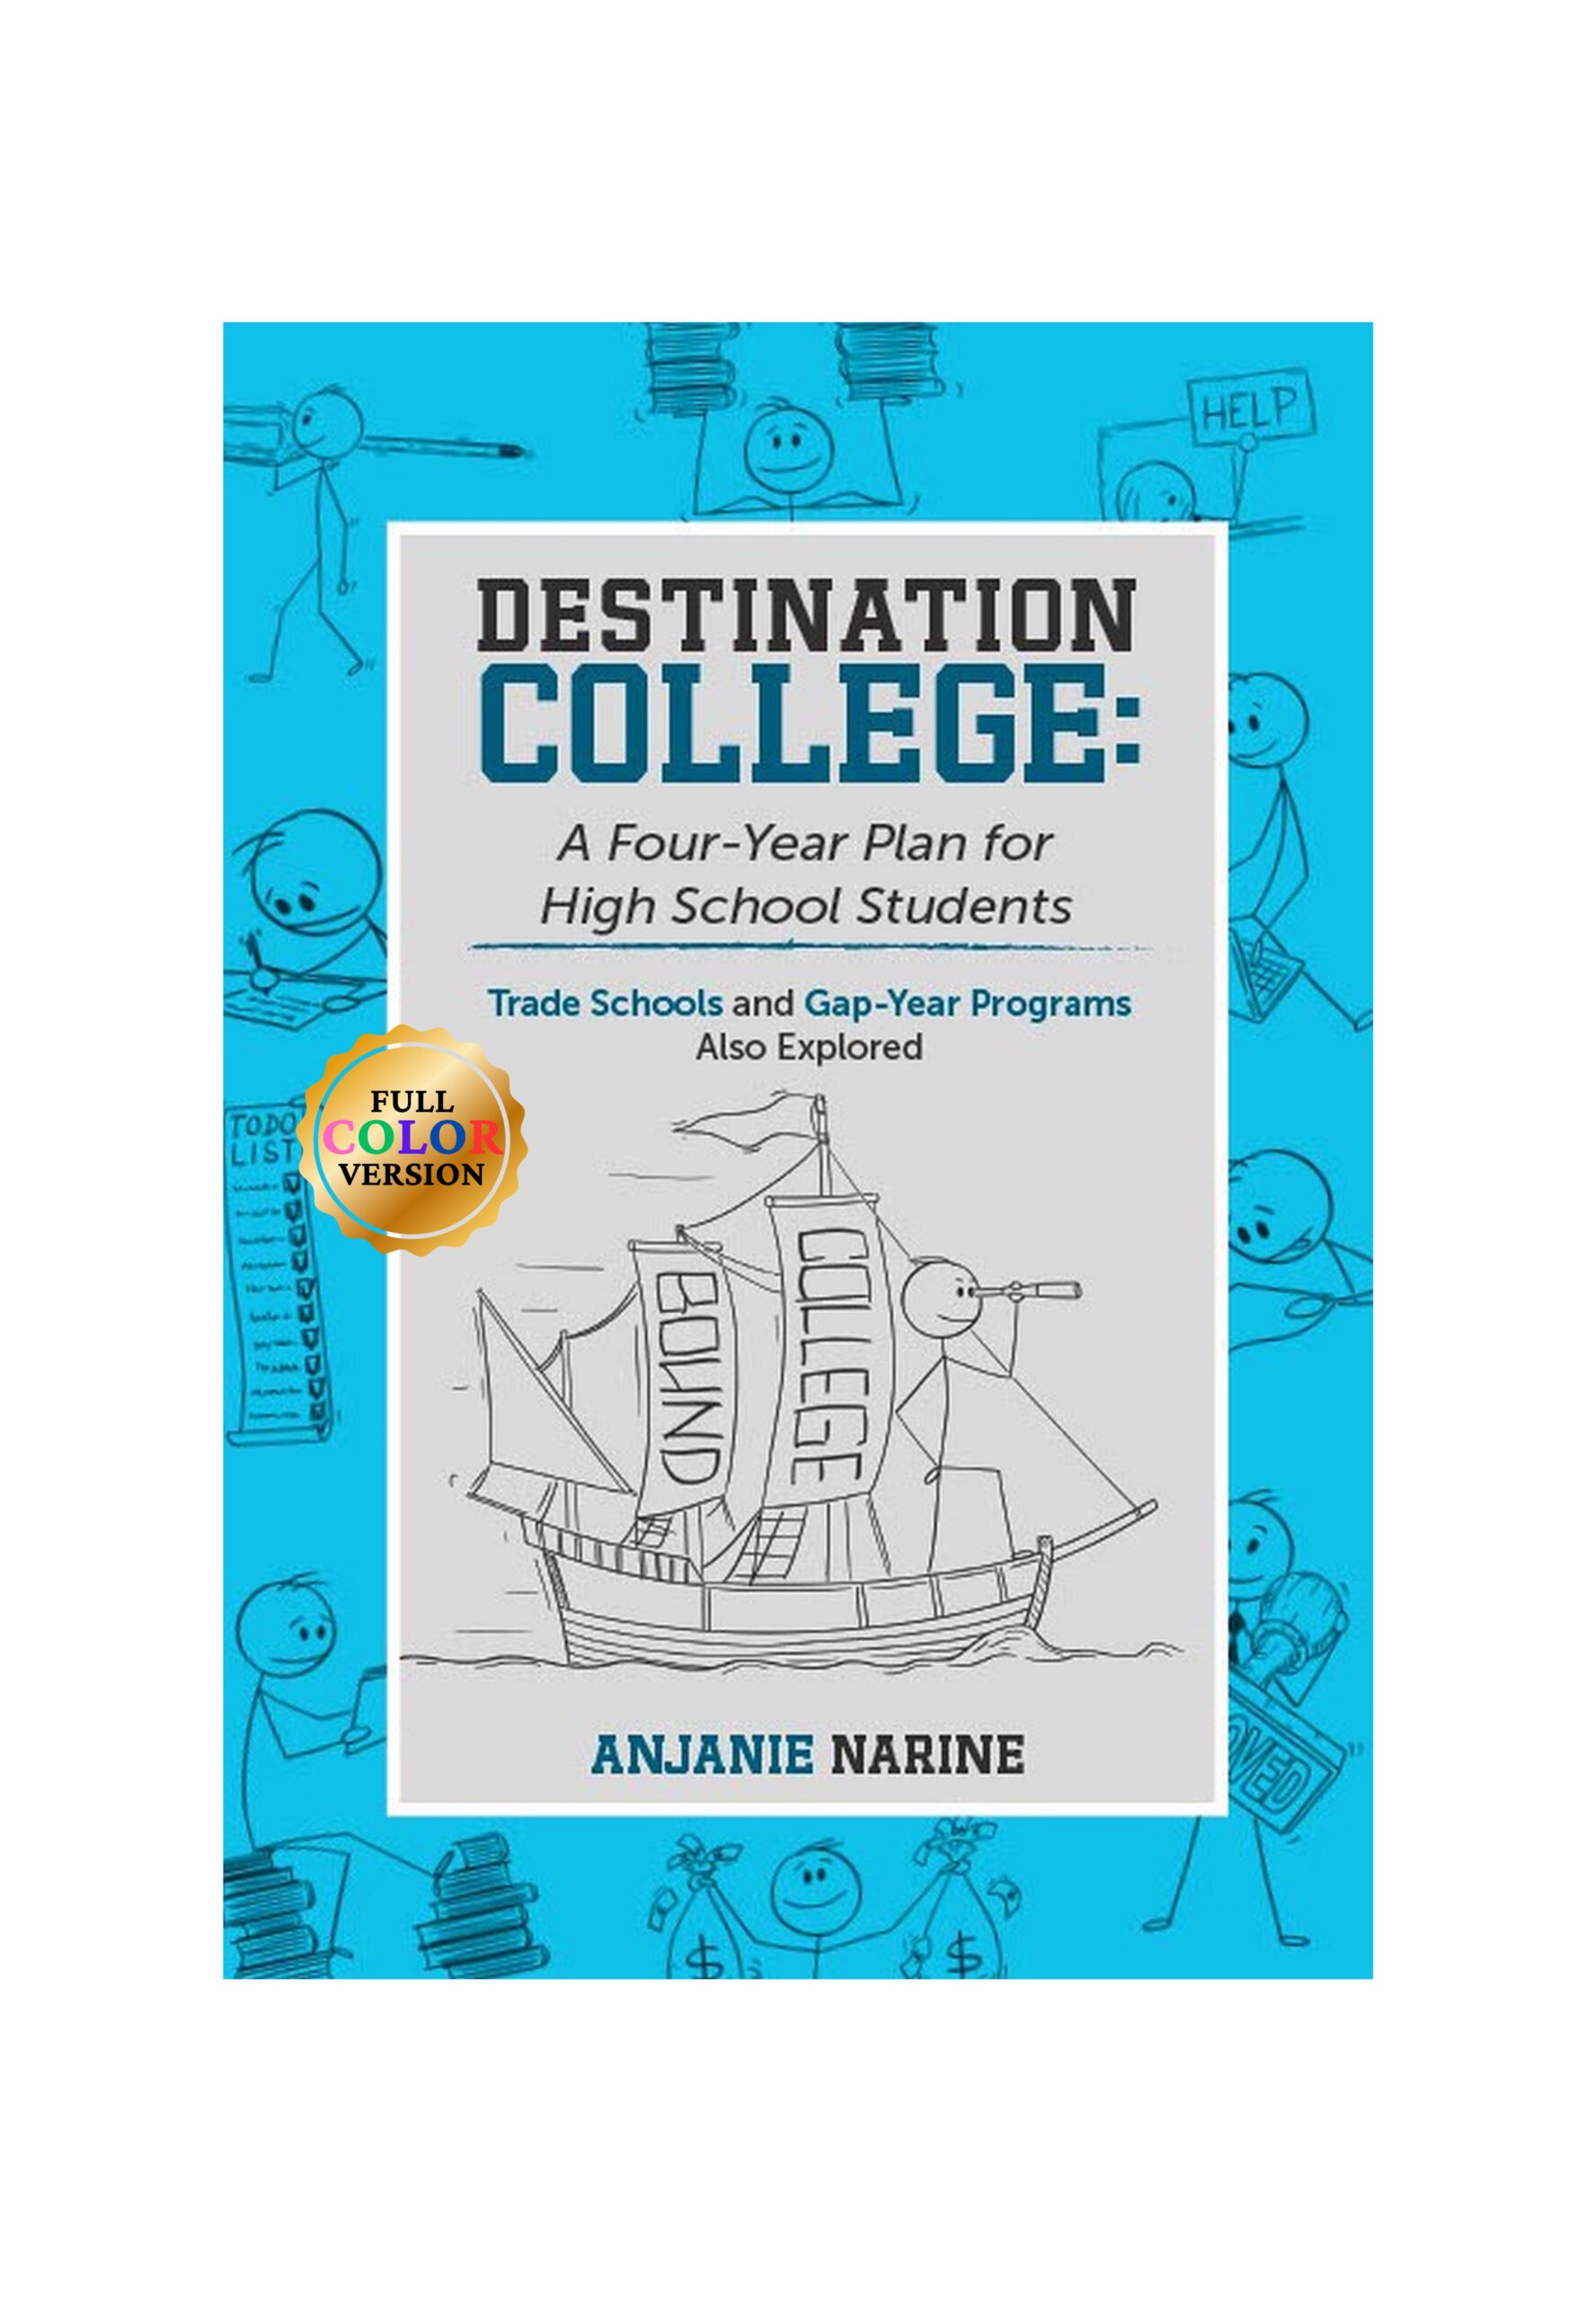 “Destination College: A Four-Year Plan for High School Students” By Anjanie Narine Now Available